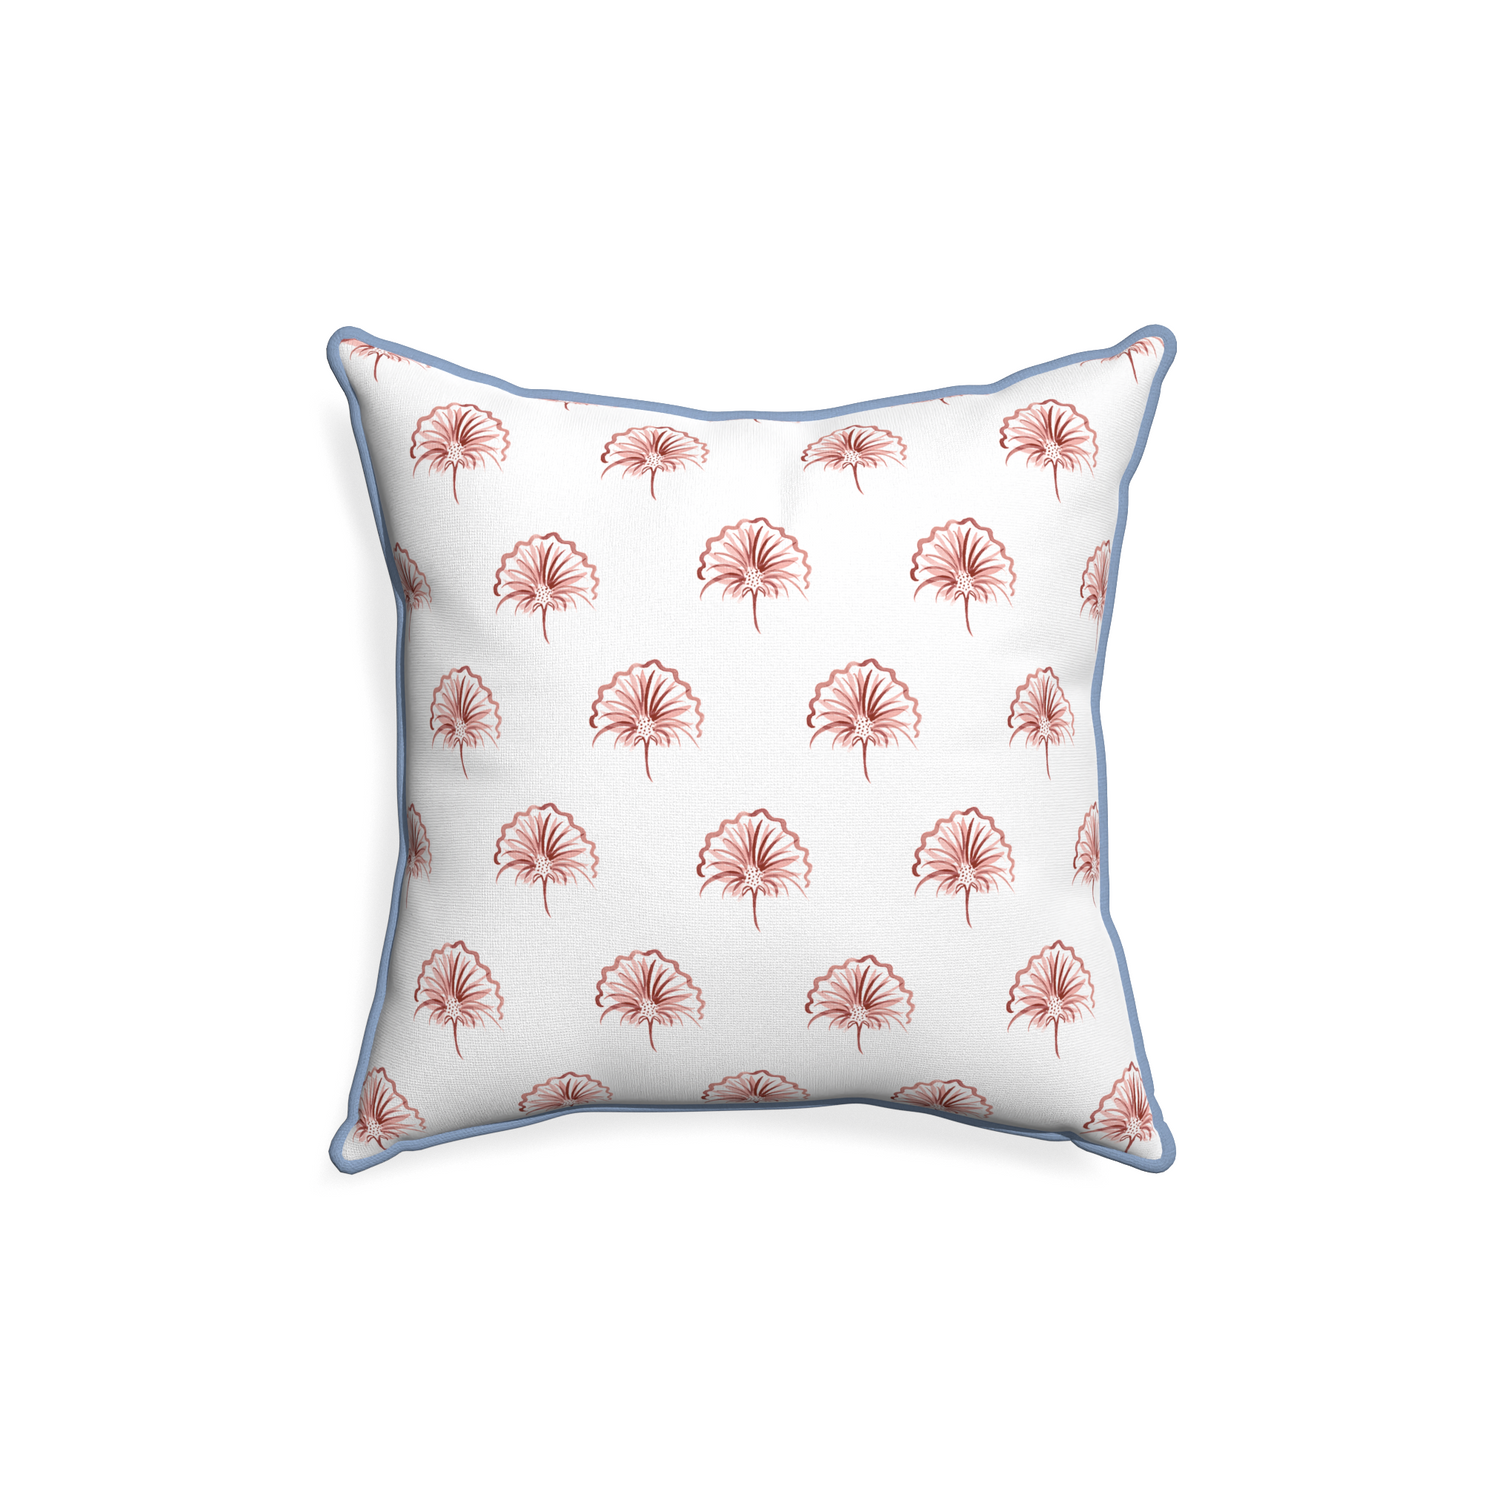 18-square penelope rose custom pillow with sky piping on white background